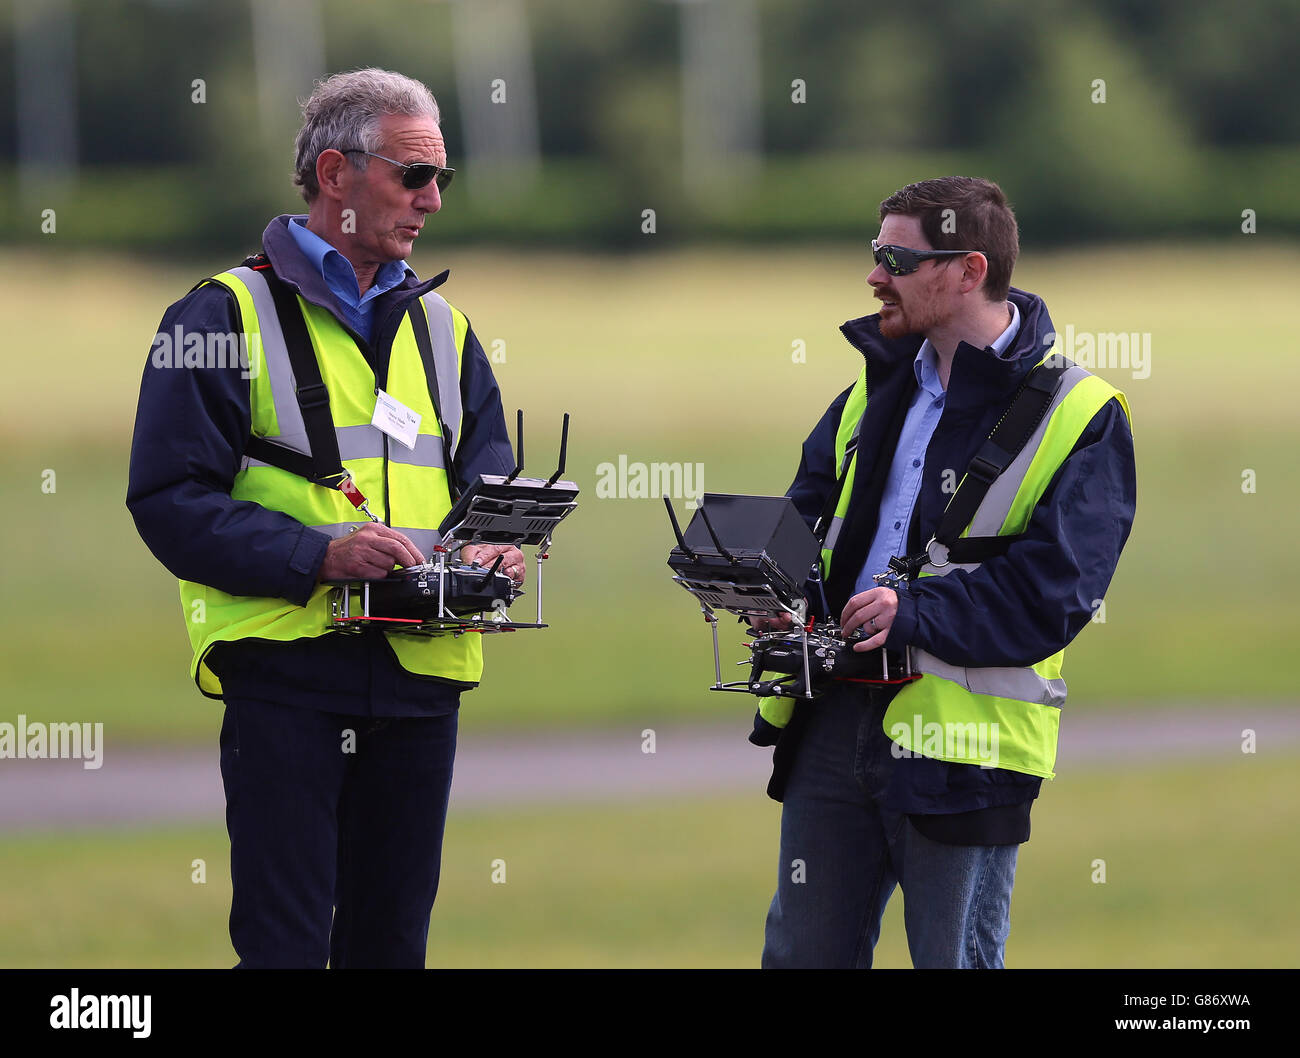 Drone operators at the inaugural Unmanned Aircraft Association of Ireland (UAAI) Meet the Drones showcase event at Weston Airport in Lucan Co Dublin. Stock Photo